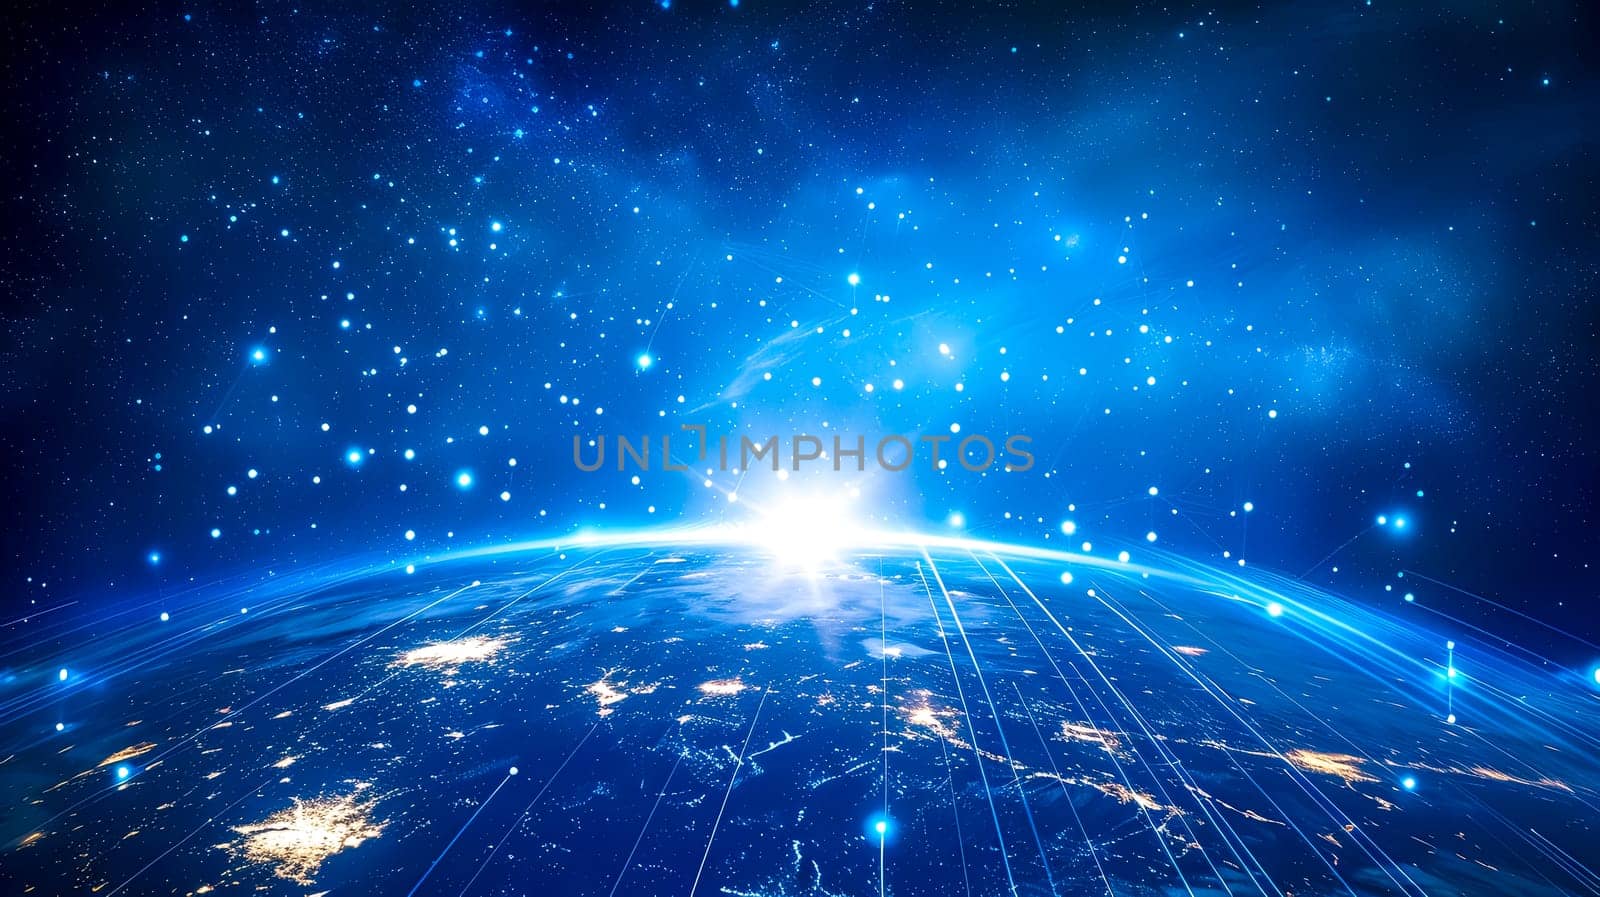 Planet Earth with Network Connections and Stars in Space by Edophoto